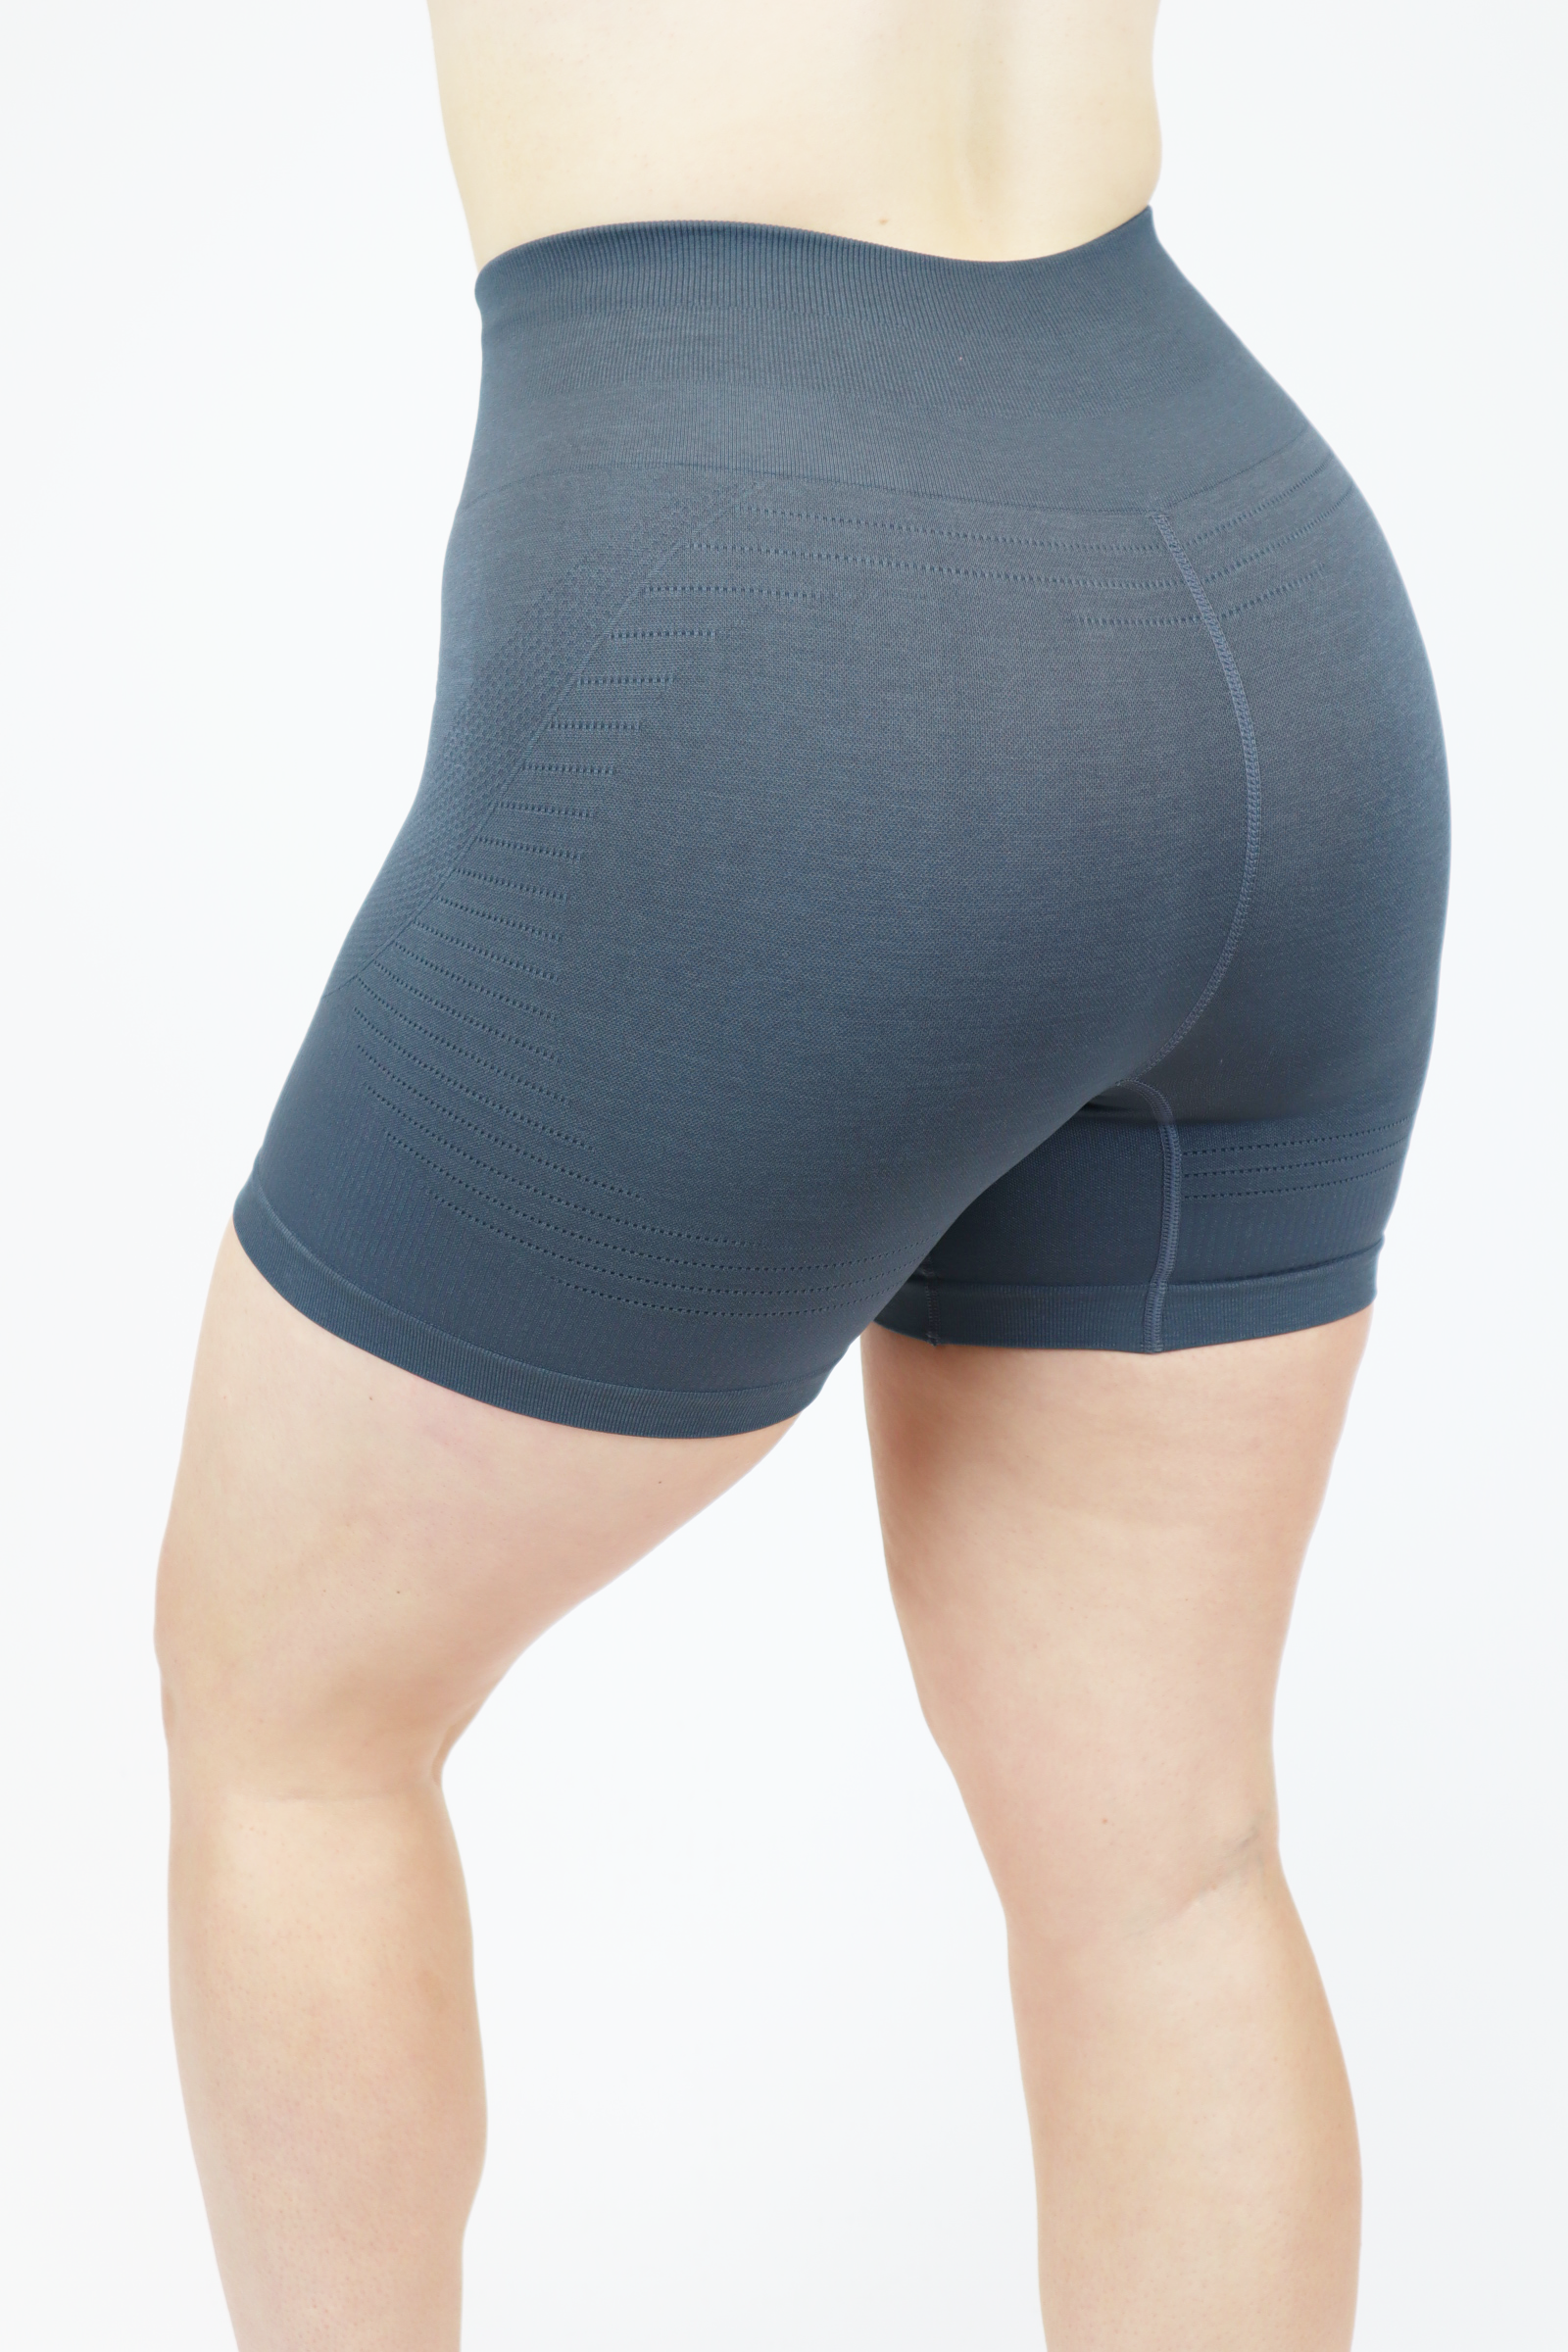 most comfortable shorts for a workout or hangout